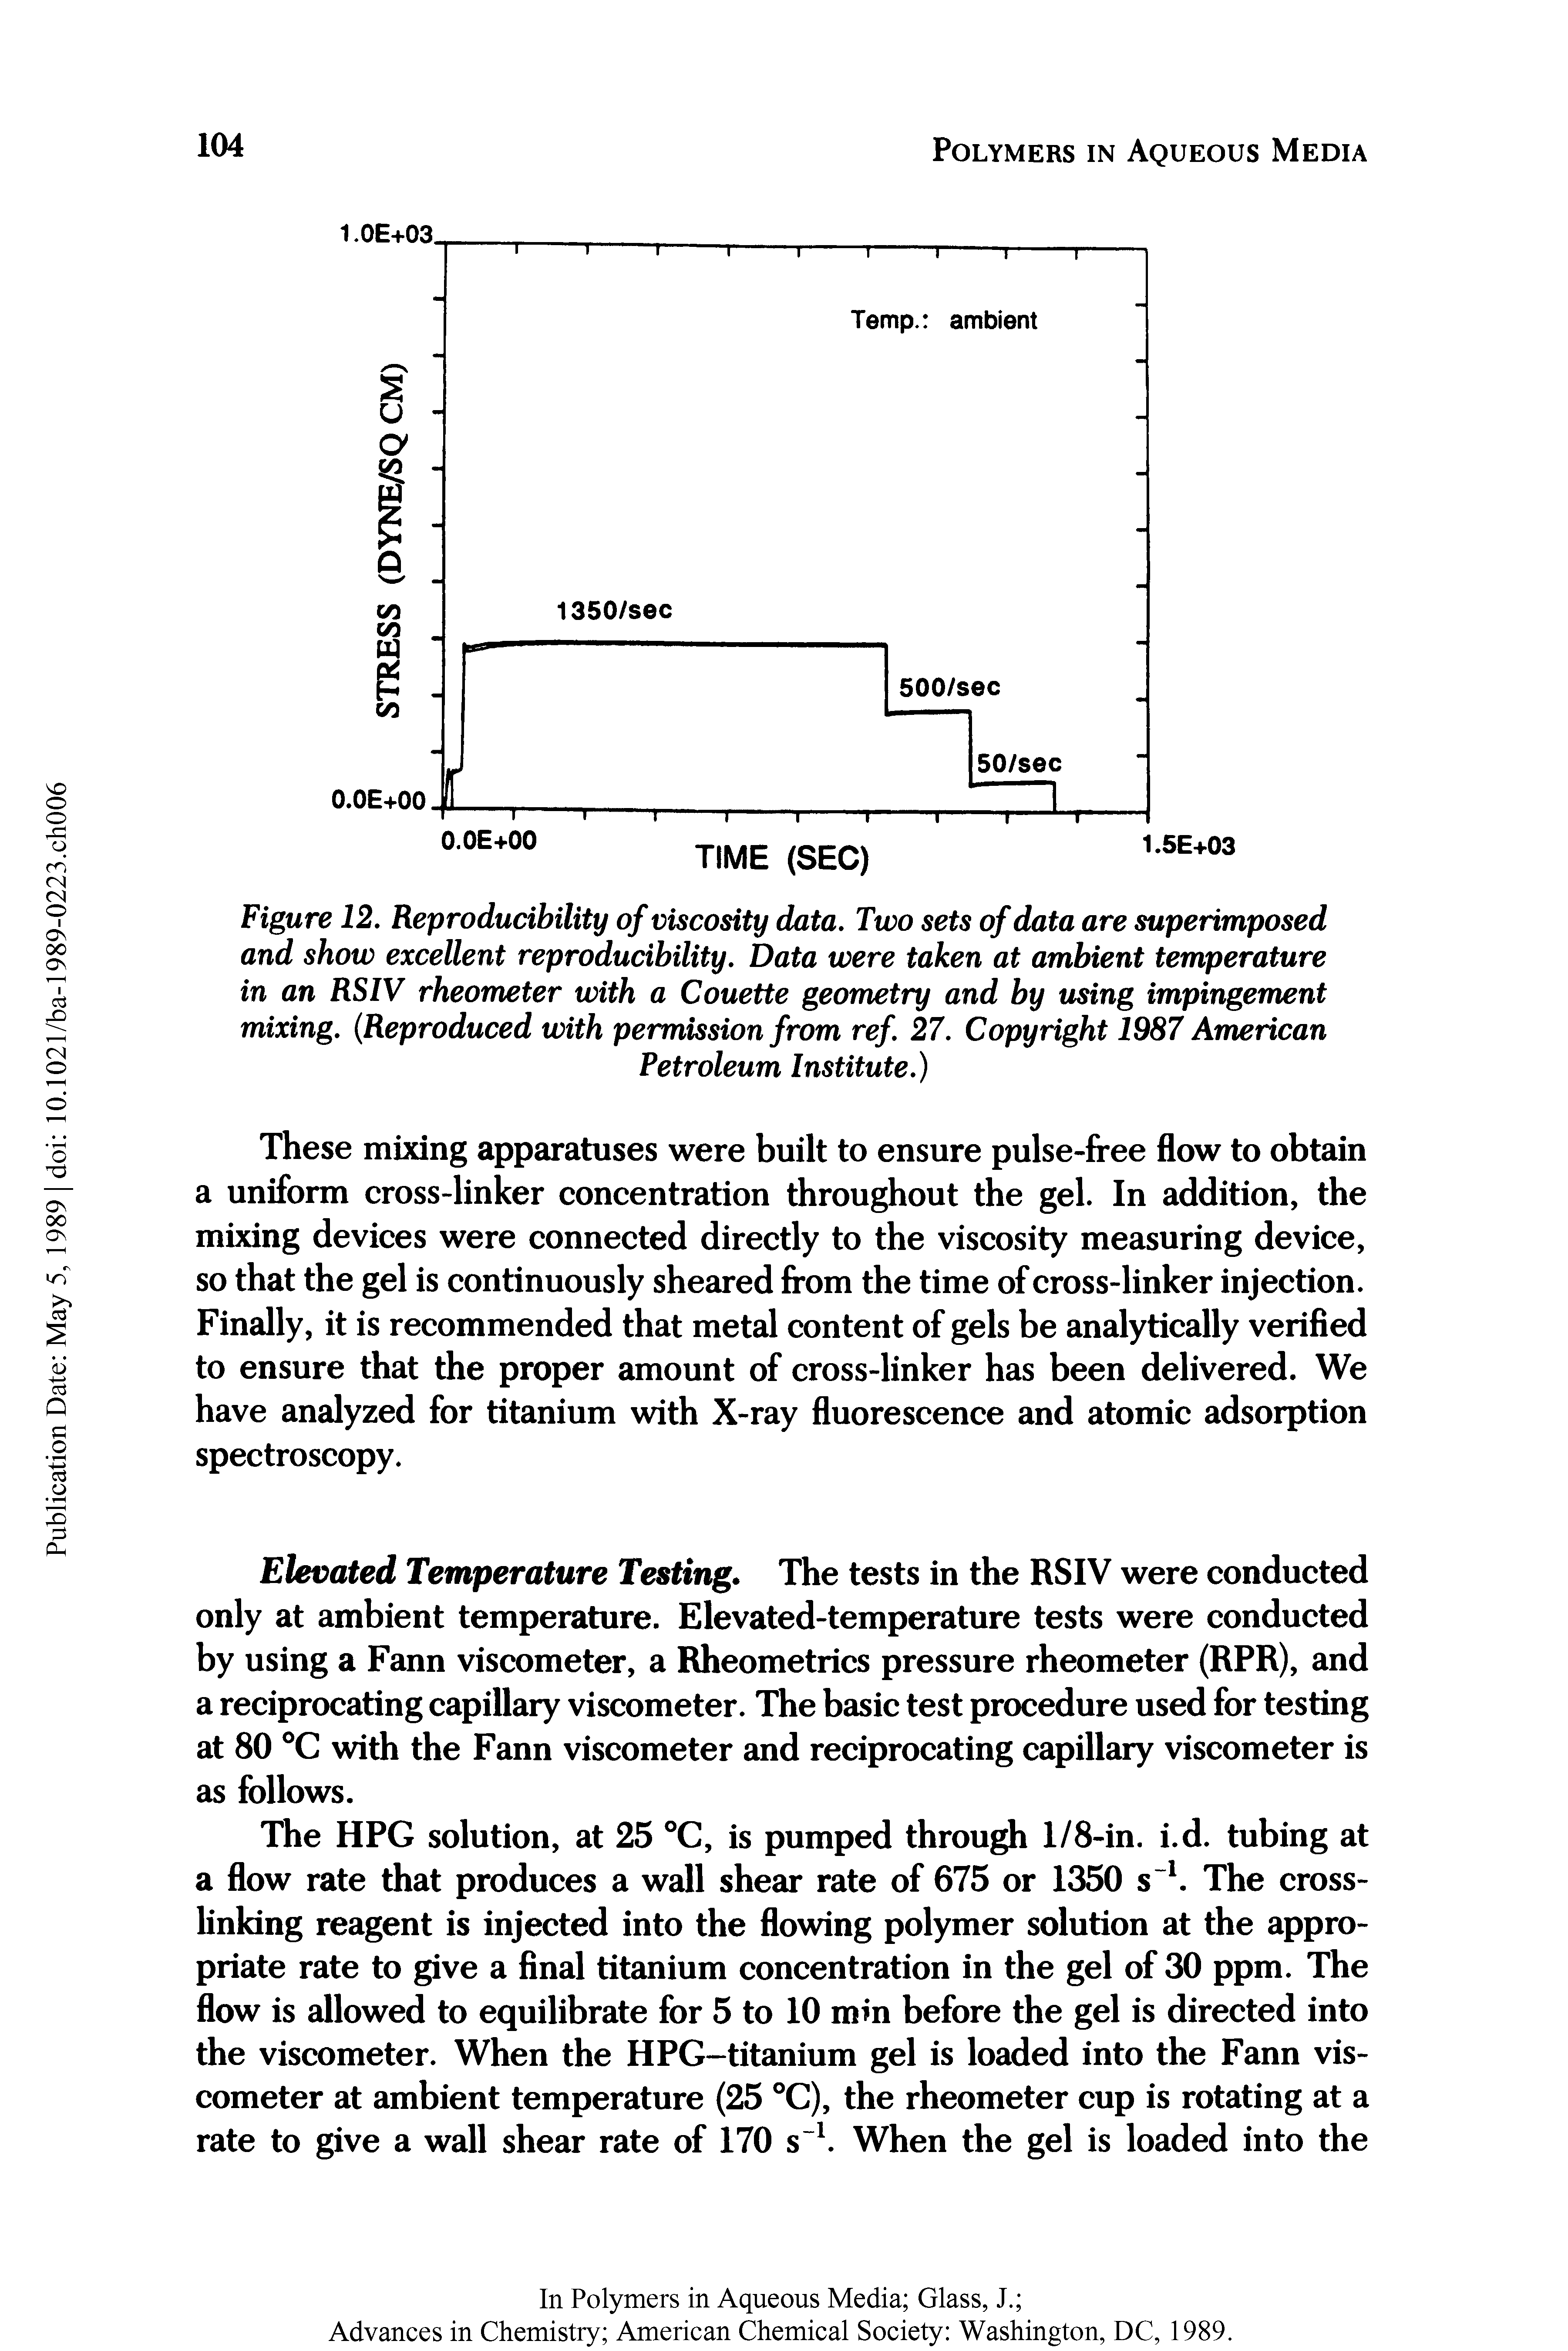 Figure 12. Reproducibility of viscosity data. Two sets of data are superimposed and show excellent reproducibility. Data were taken at ambient temperature in an RSIV rheometer with a Couette geometry and by using impingement mixing. Reproduced with permission from ref. 27. Copyright 1987 American...